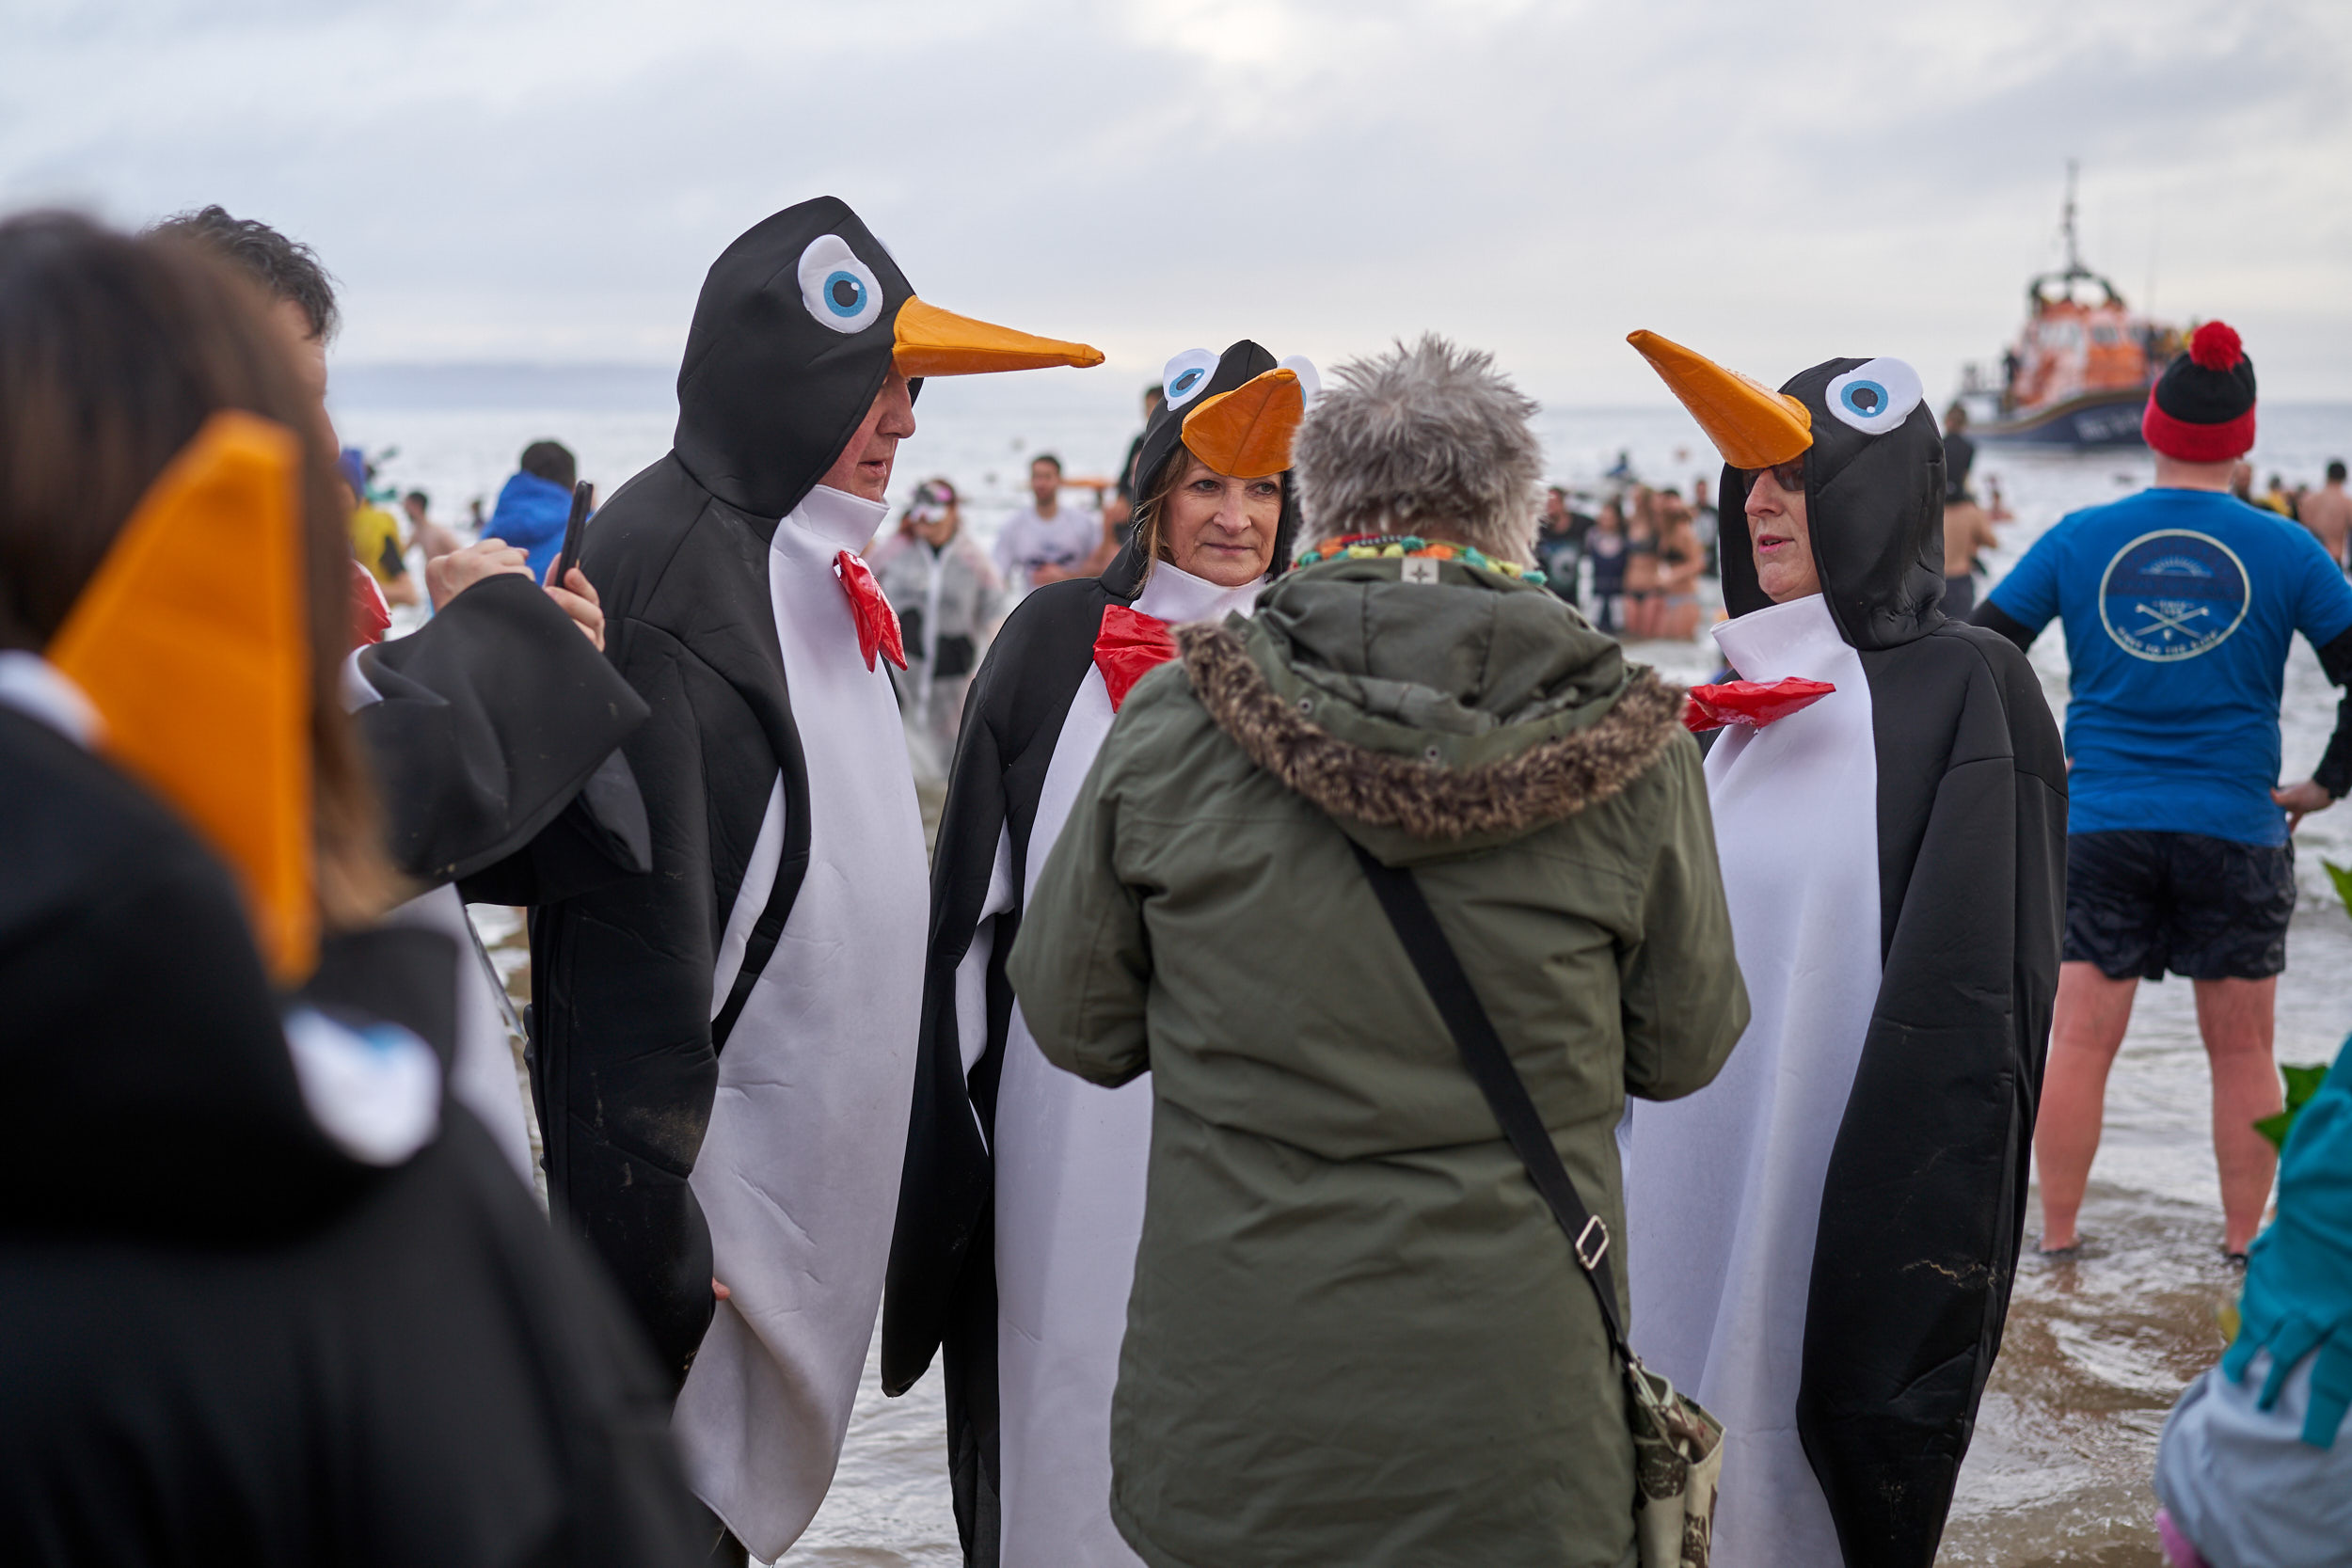 PARTICIPANTS POSE IN PENGUIN SUITS FOR A PHOTO DURING THE TENBY BOXING DAY SWIM